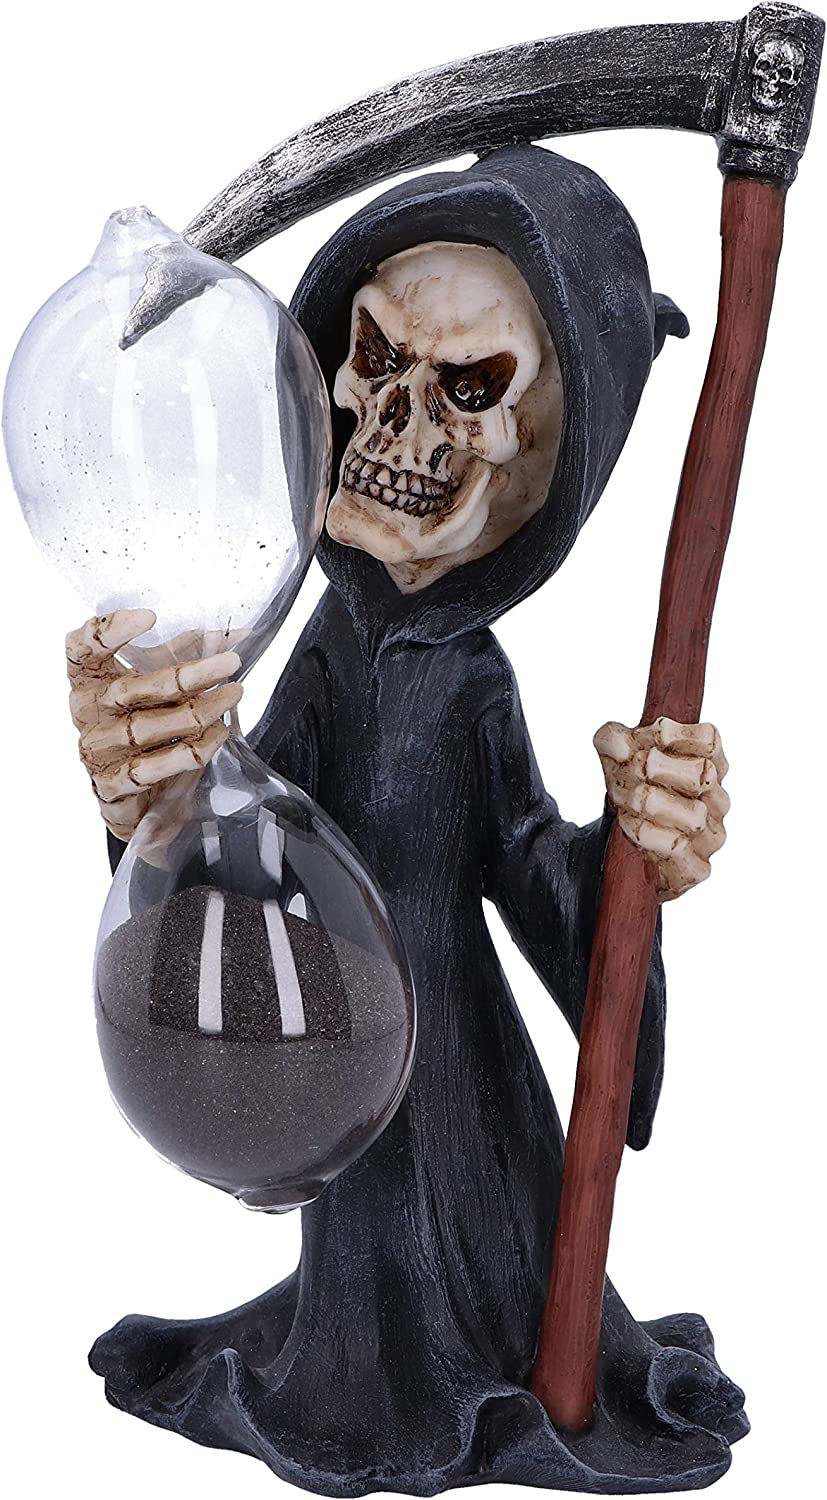 Nemesis Now Out of Time 20.5cm Cartoon Grim Reaper Sand Timer, Black